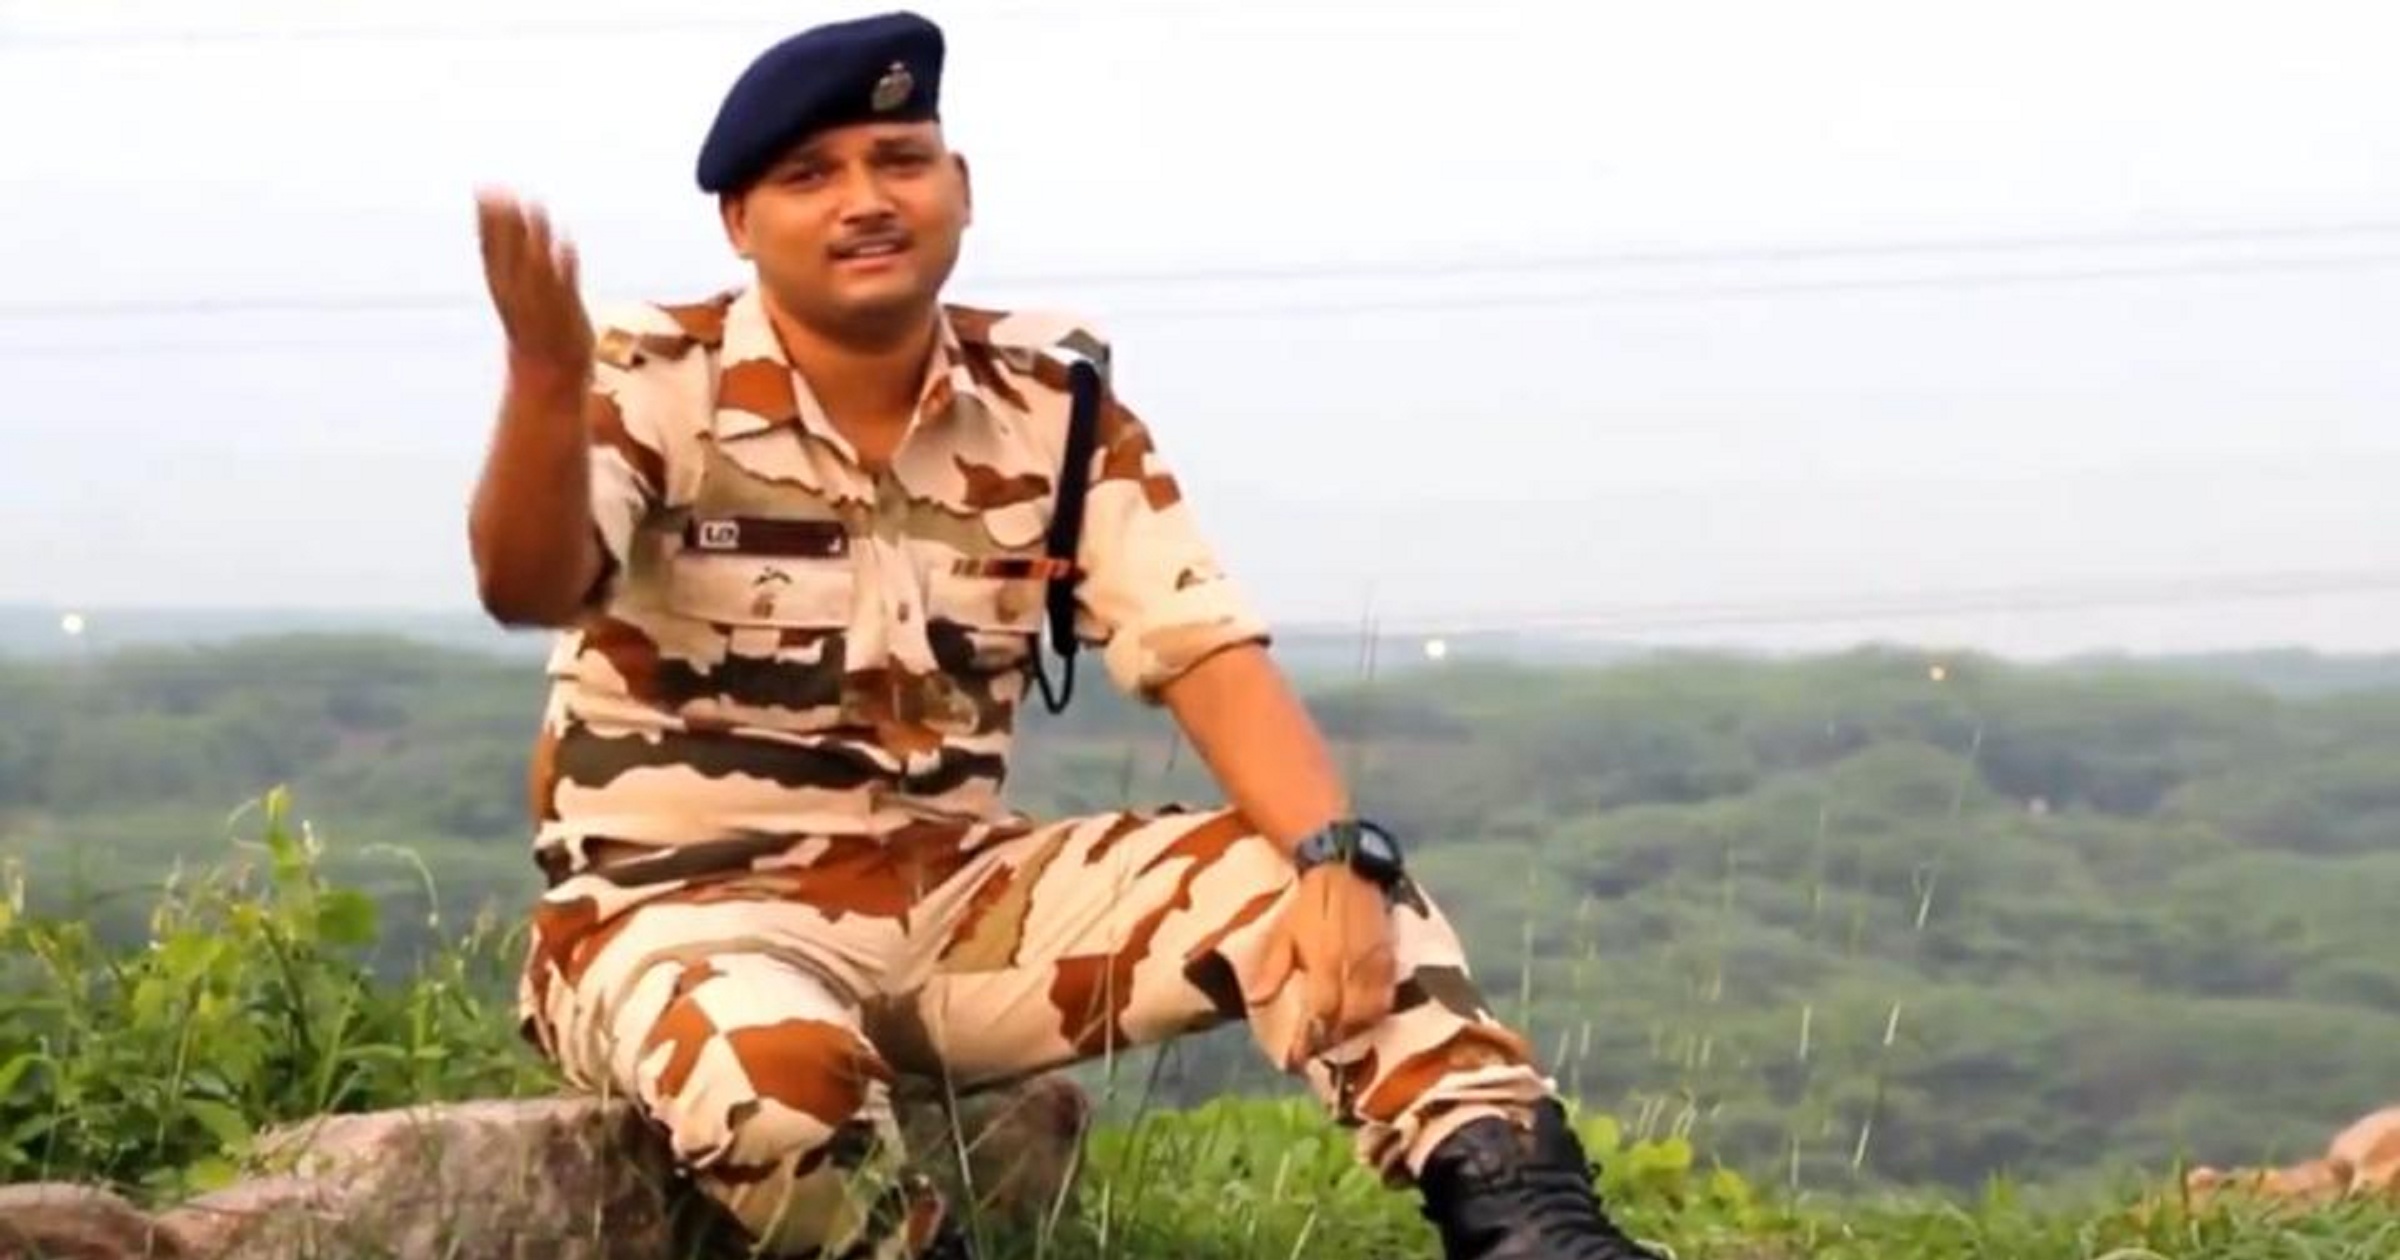 Watch: Indian Soldier Sings ‘Sandese Aate Hai’ in Heartwarming Video For Independence Day!